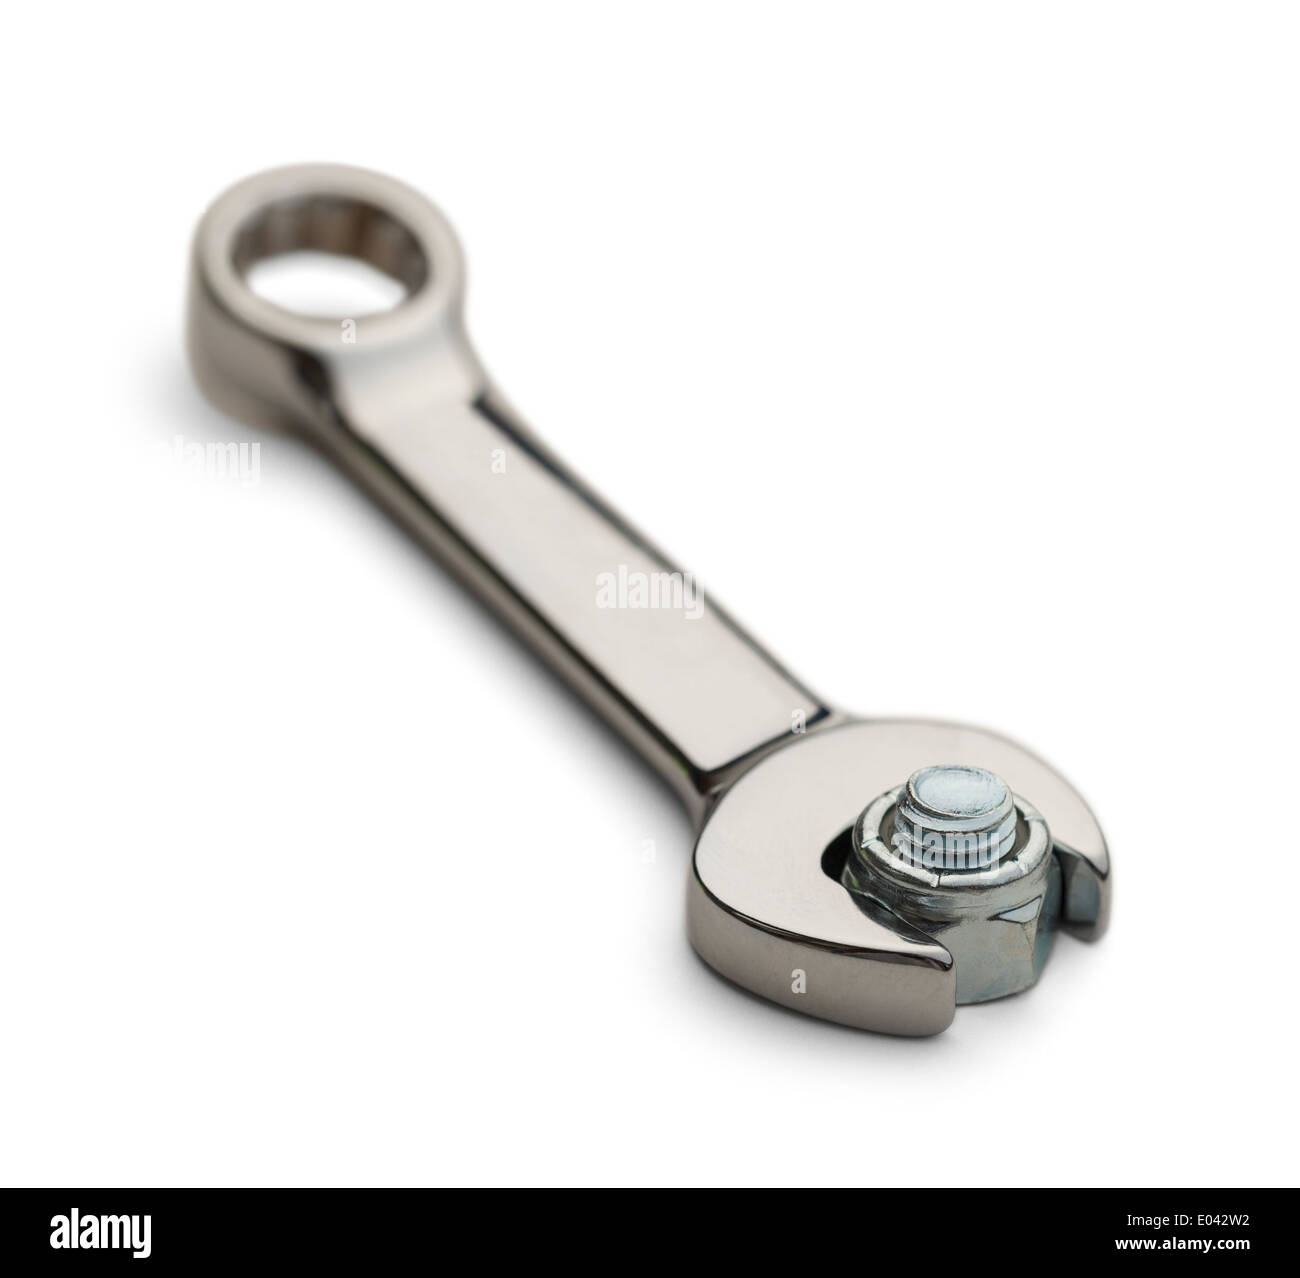 Wrench and Bolt Isolated On White Background. Stock Photo